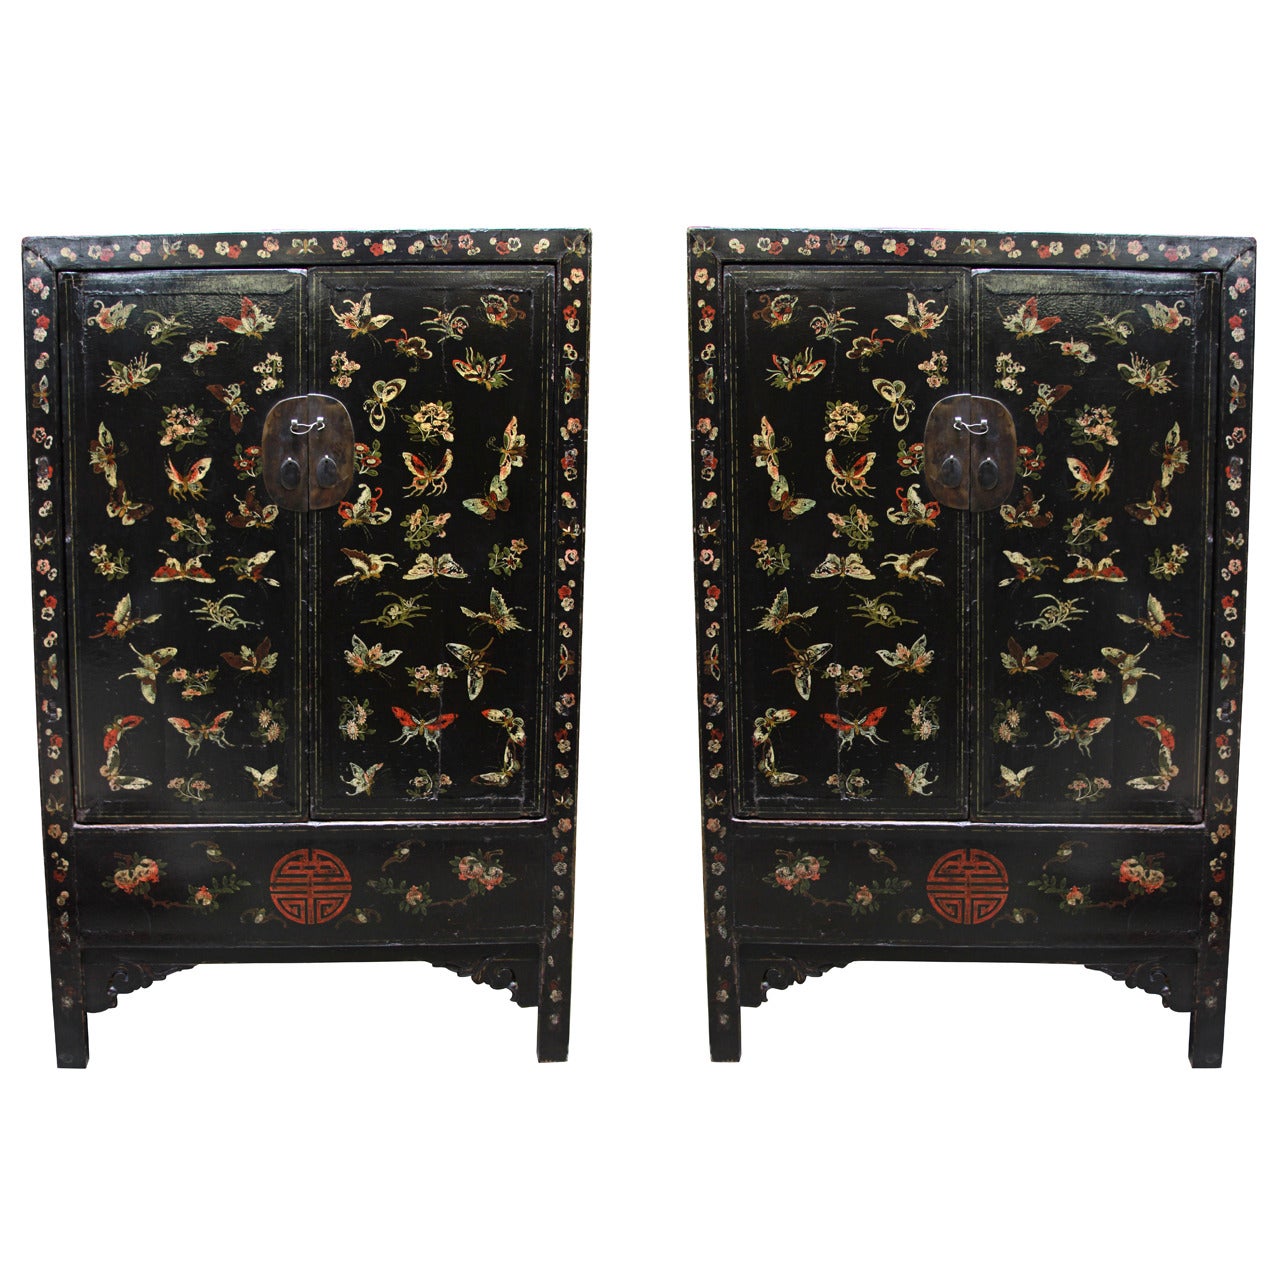 18th Century Chinese Butterfly Cabinets